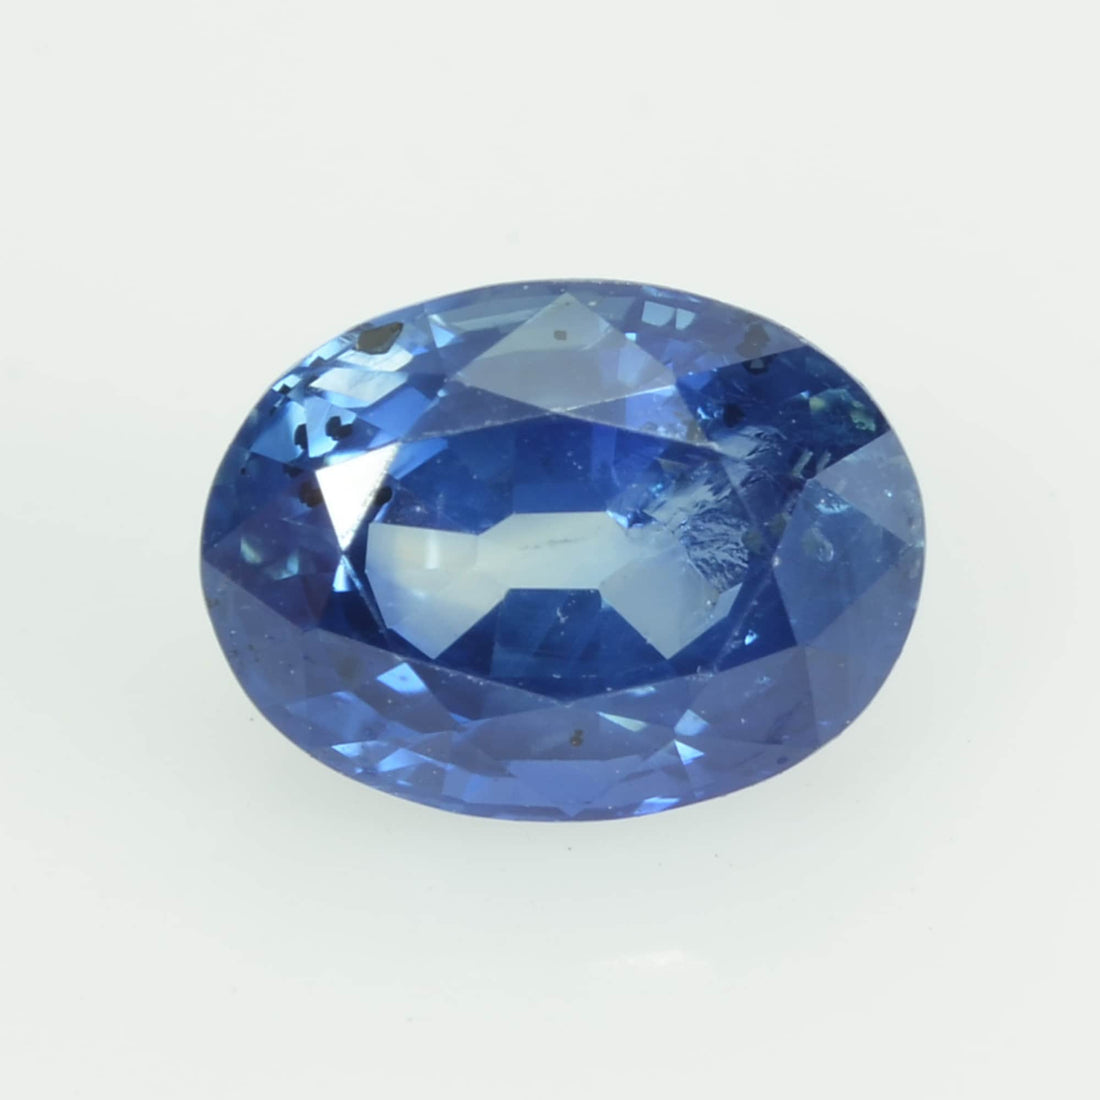 0.98 Cts Natural Blue Sapphire Loose Gemstone Oval Cut AGL Certified